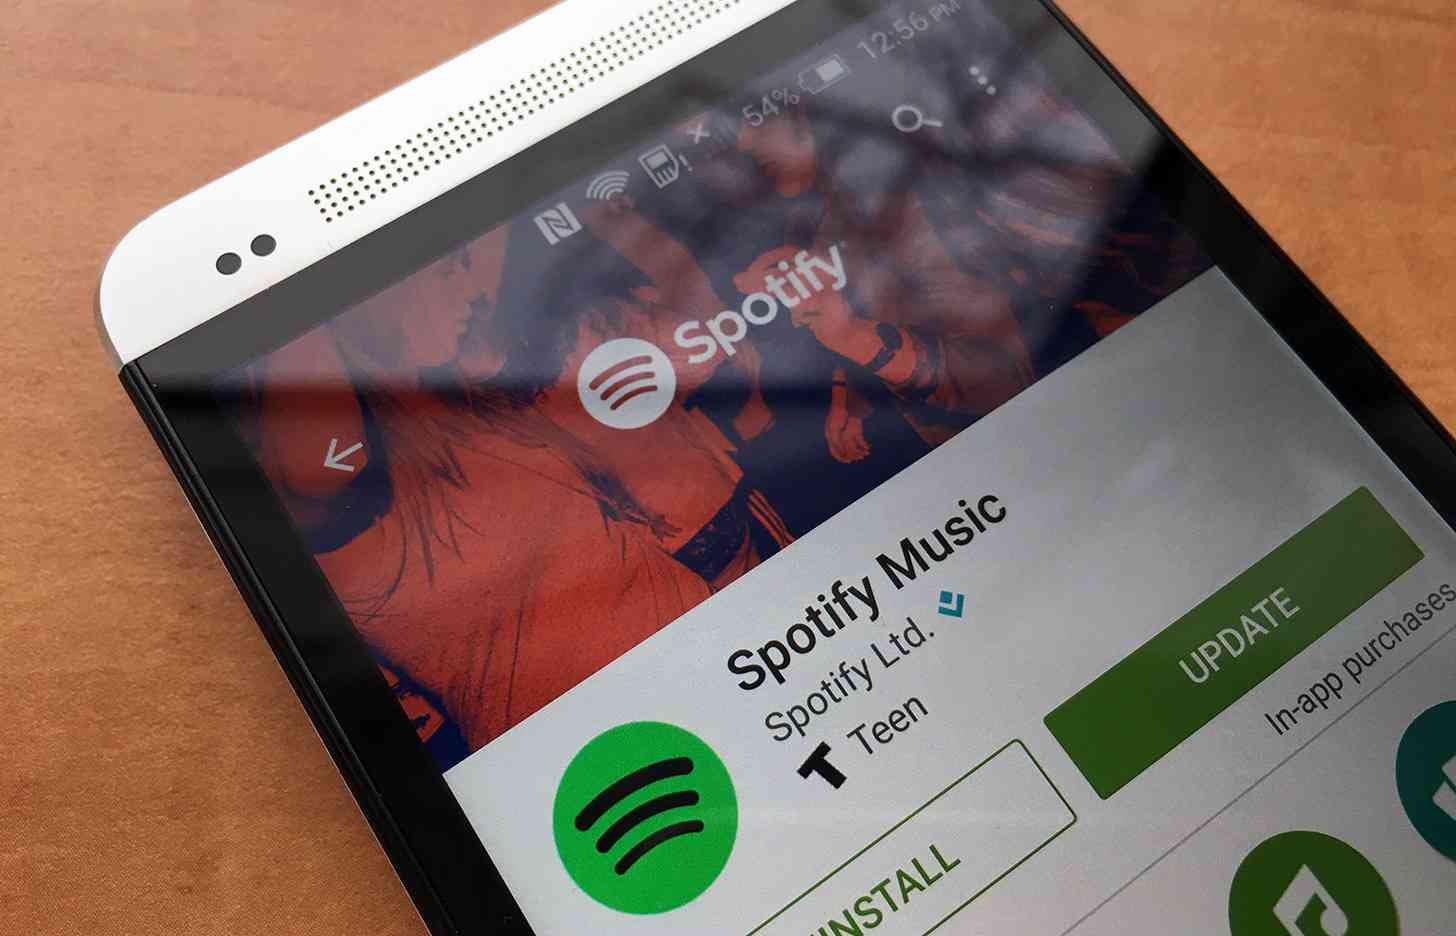 Spotify Android app